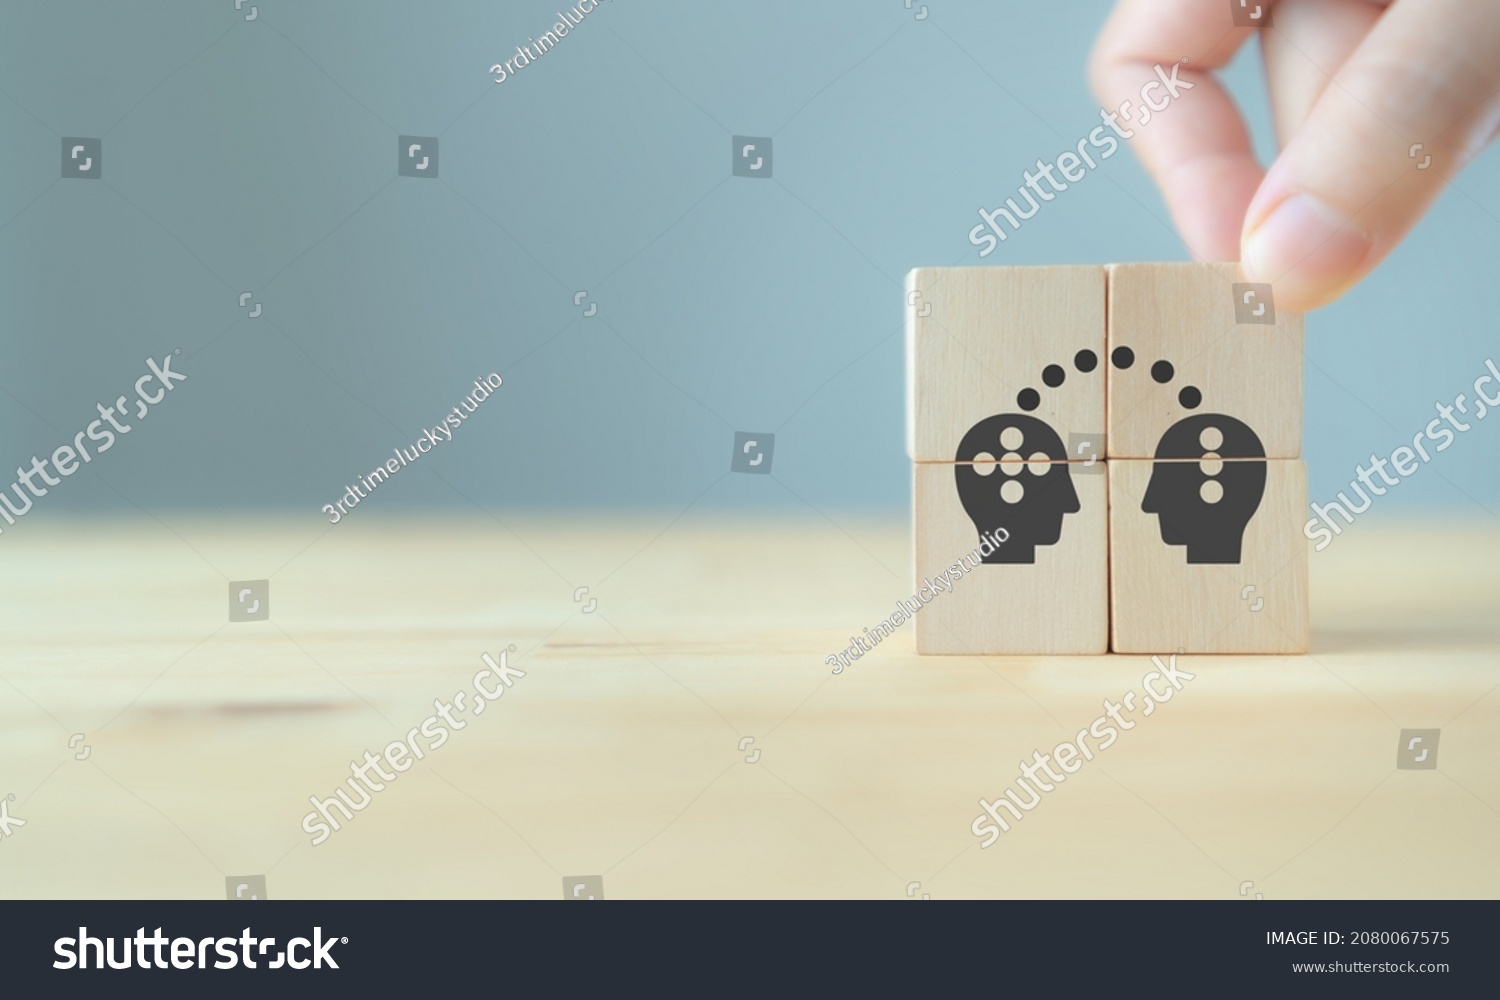 Knowledge and ideas sharing between two people head icon on wooden cube. Transferring knowledge, innovation, brainstorming concept. Business strategies to technology evolution re-skill and new skill.  #2080067575